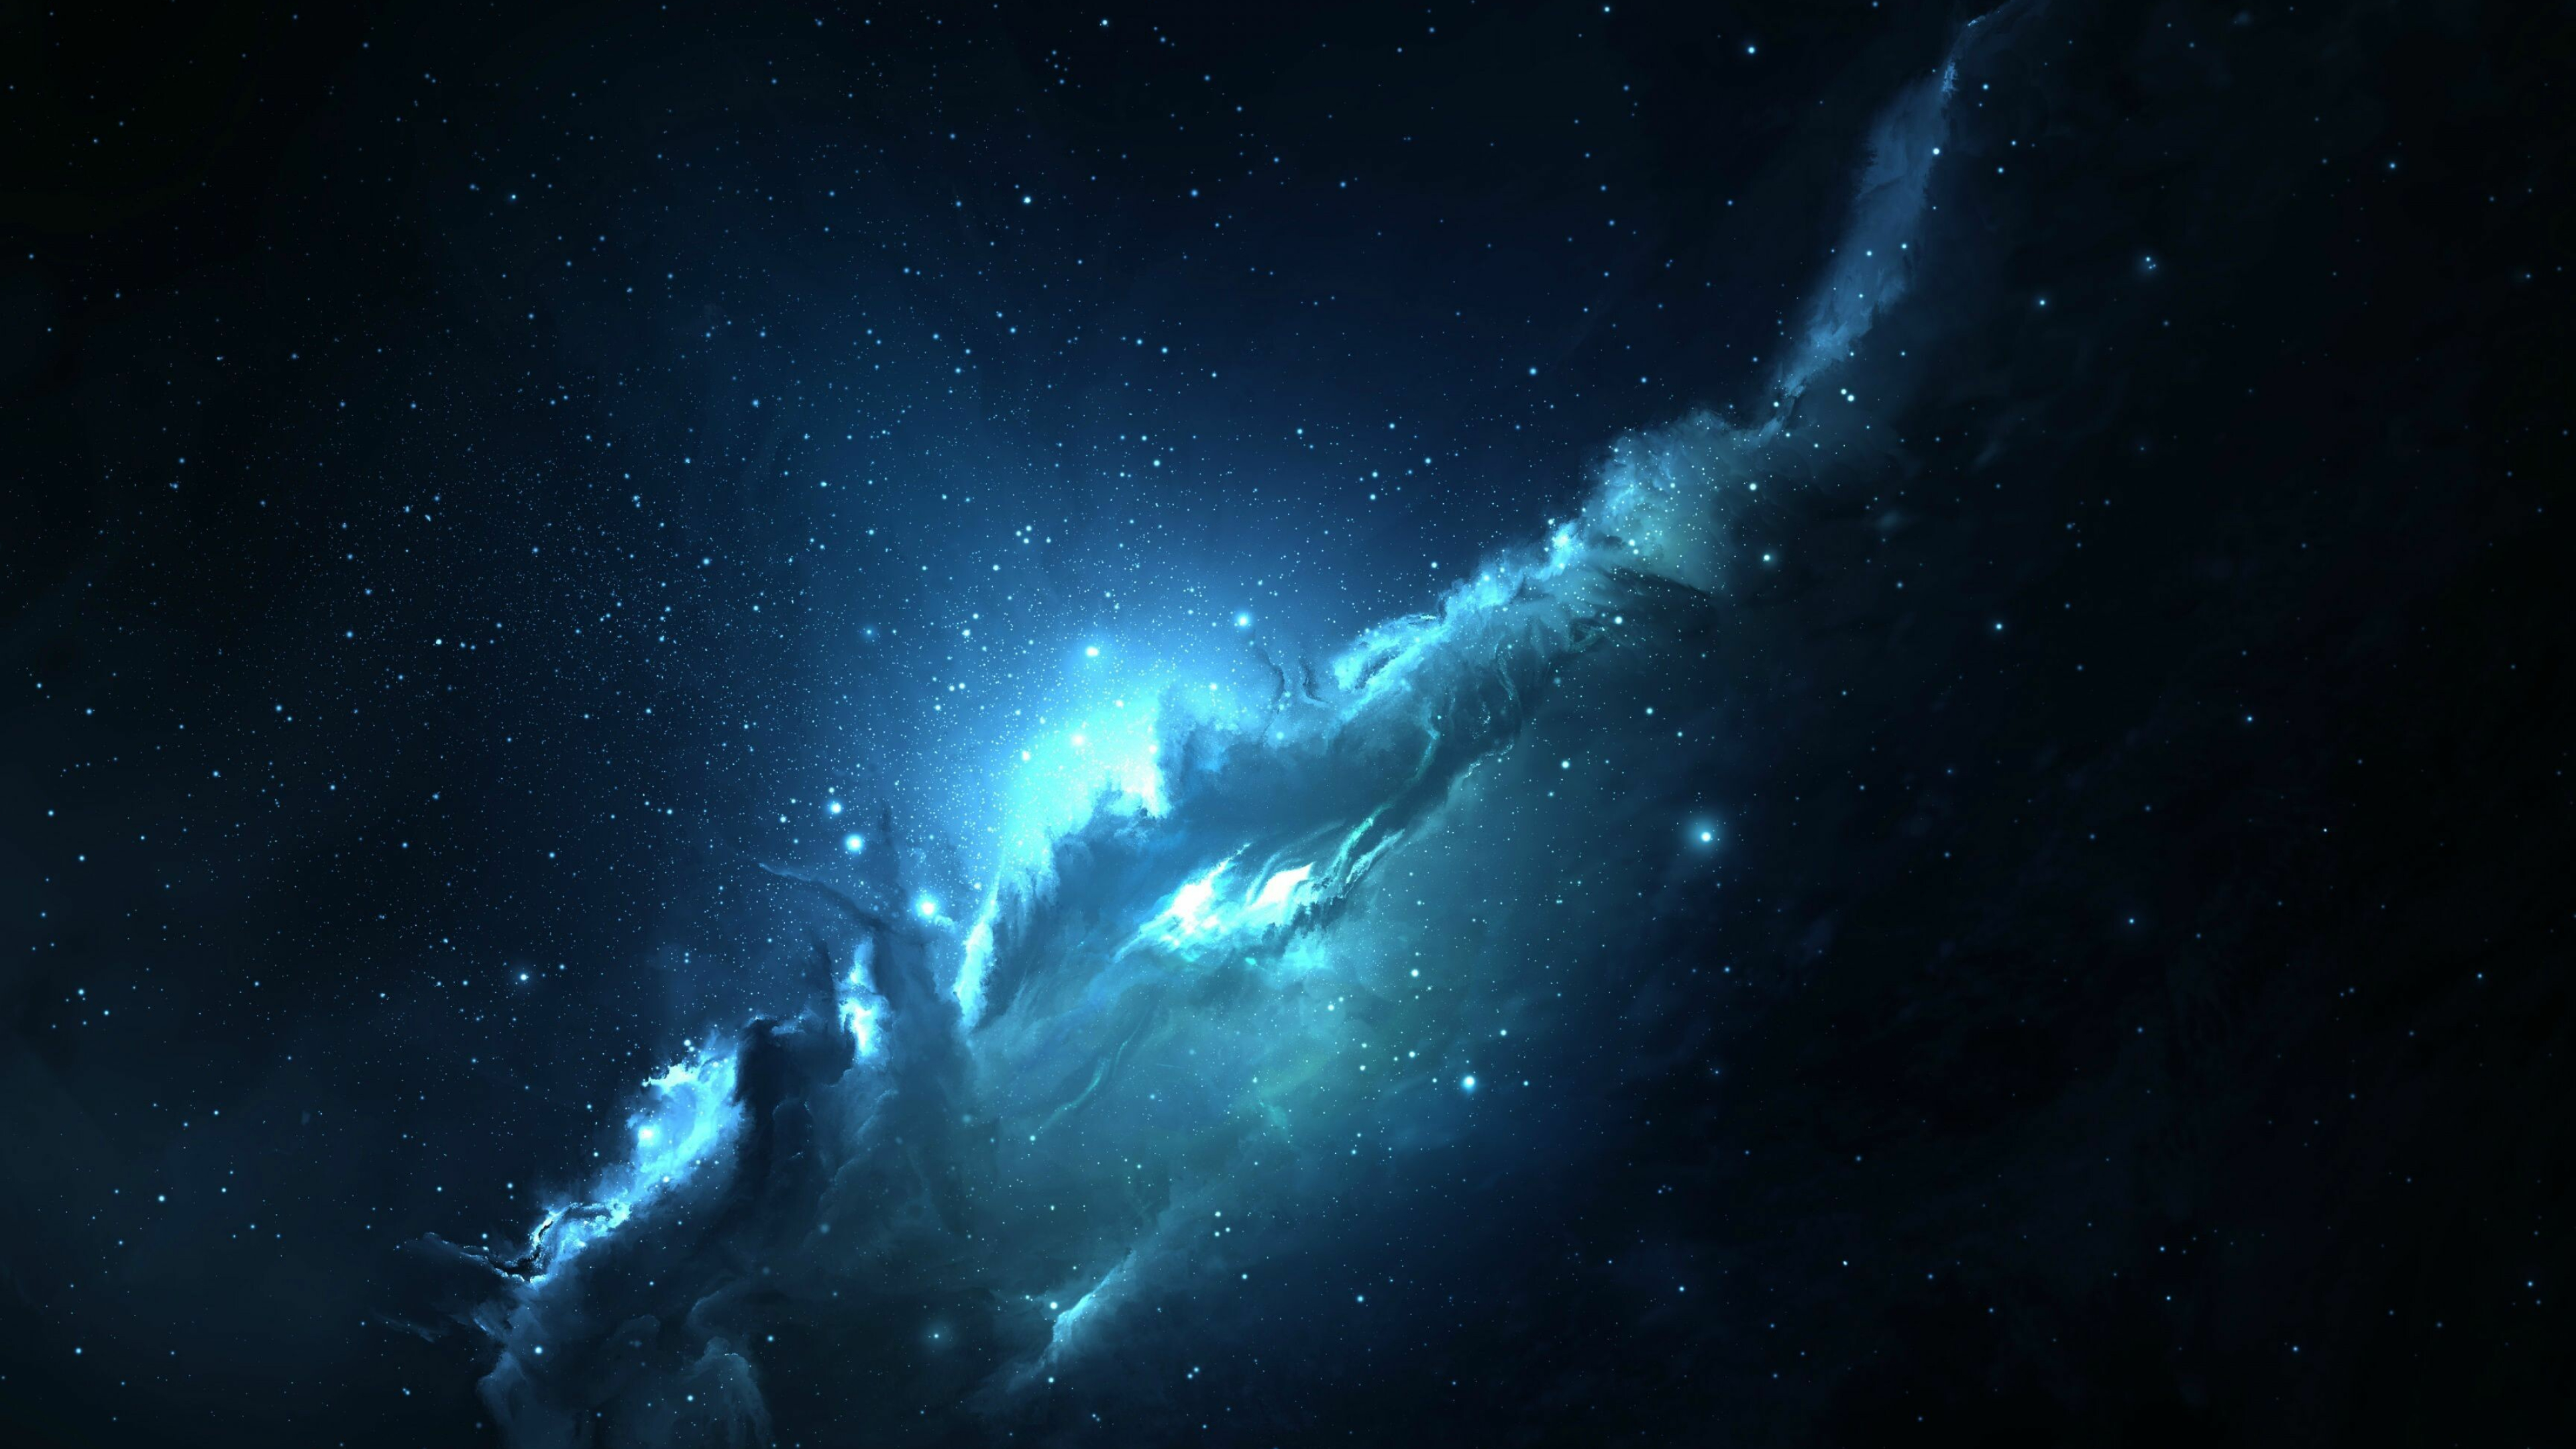 Outer Space Wallpapers - Top 35 Best Outer Space Backgrounds Download